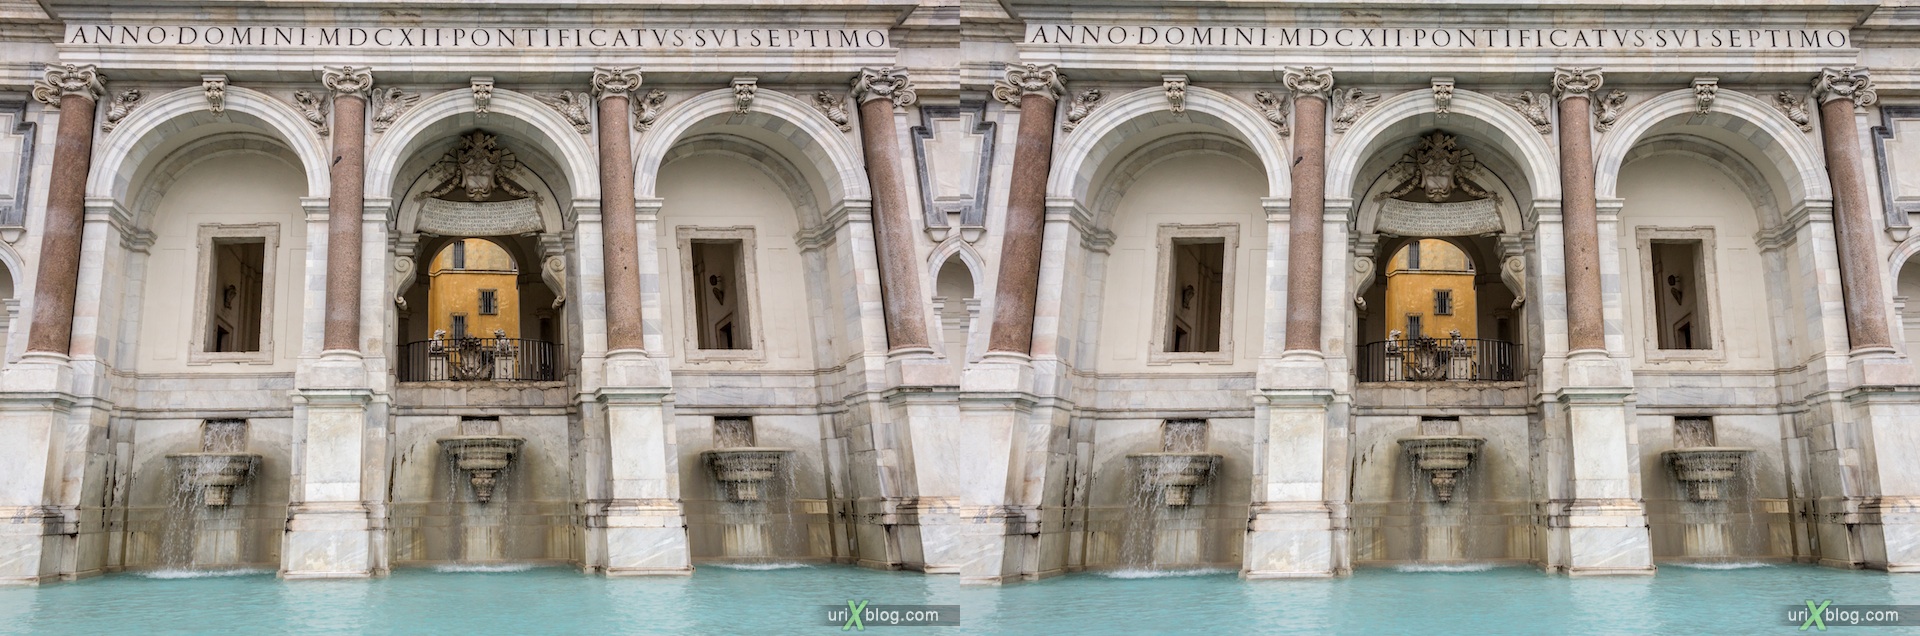 2012, dell'Acqua Paola fountain, Rome, Italy, 3D, stereo pair, cross-eyed, crossview, cross view stereo pair